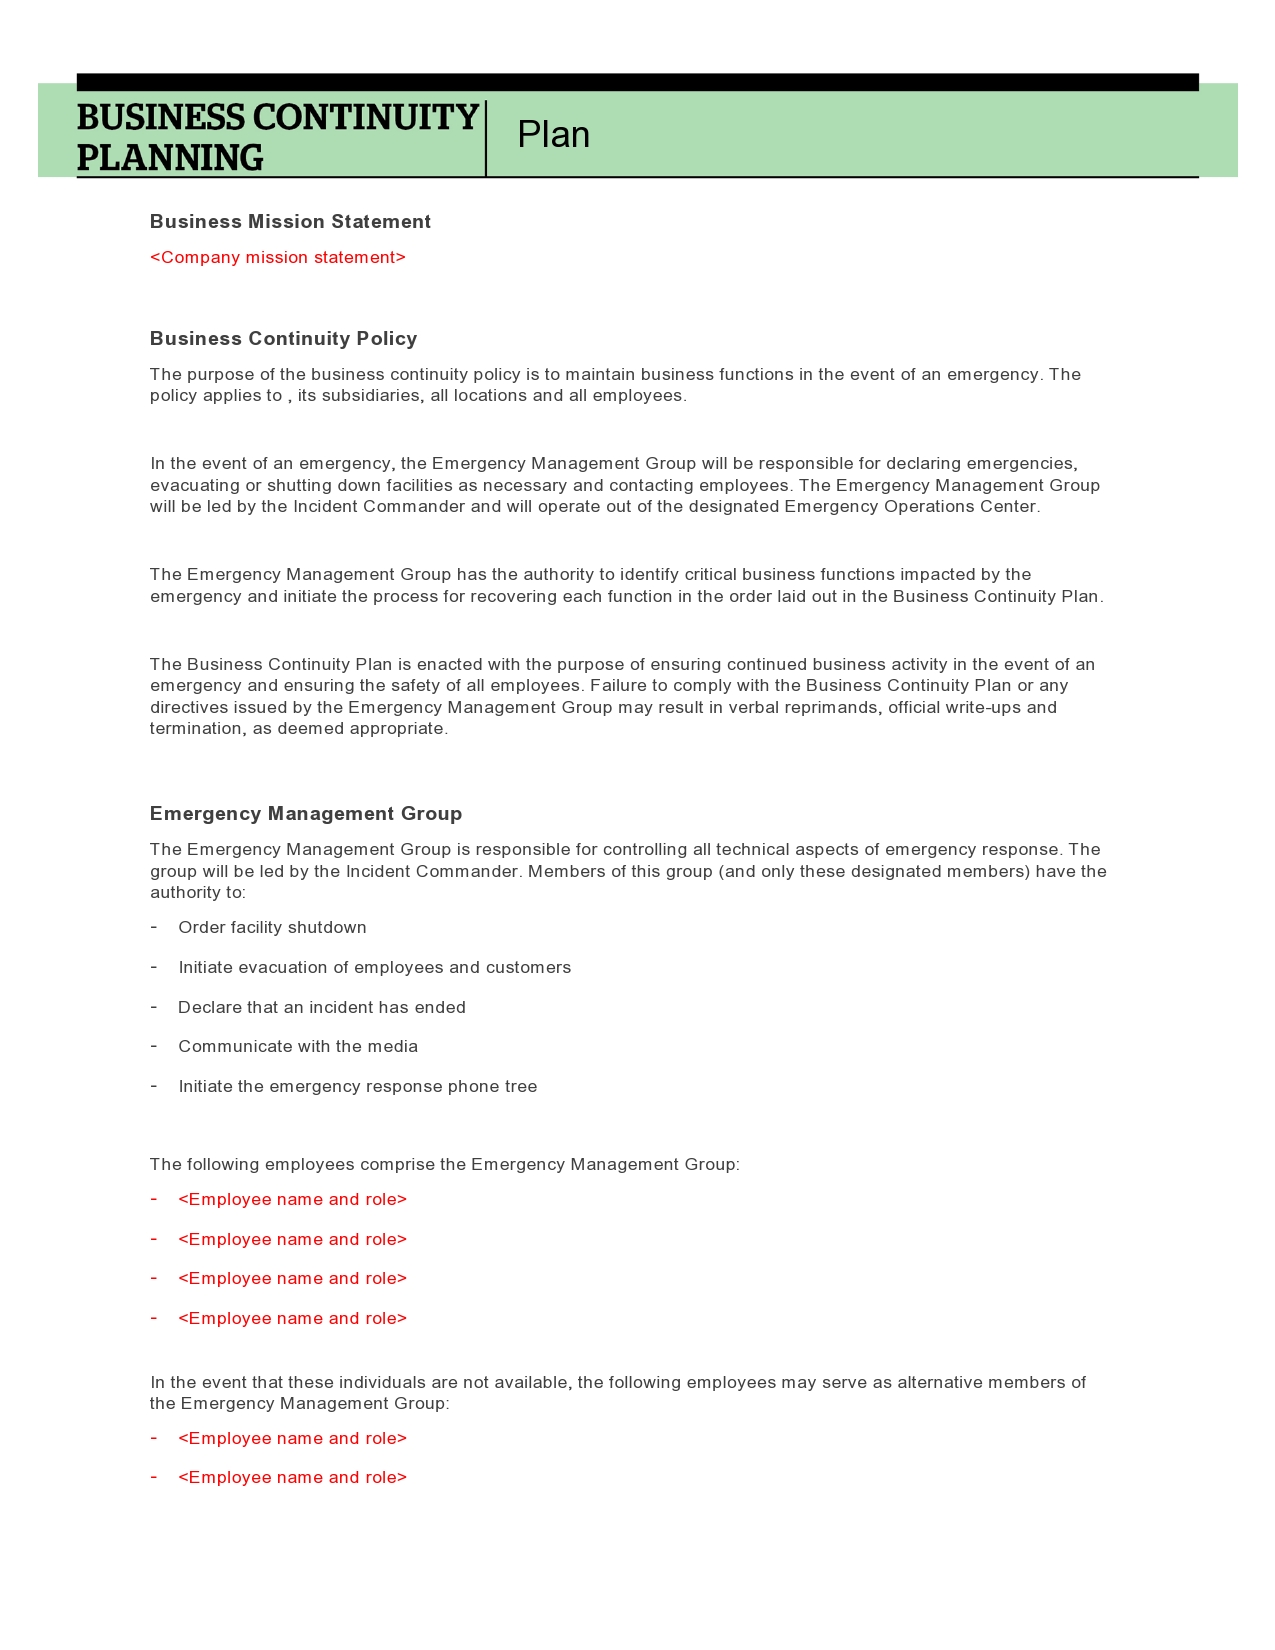 Free business continuity plan template 03